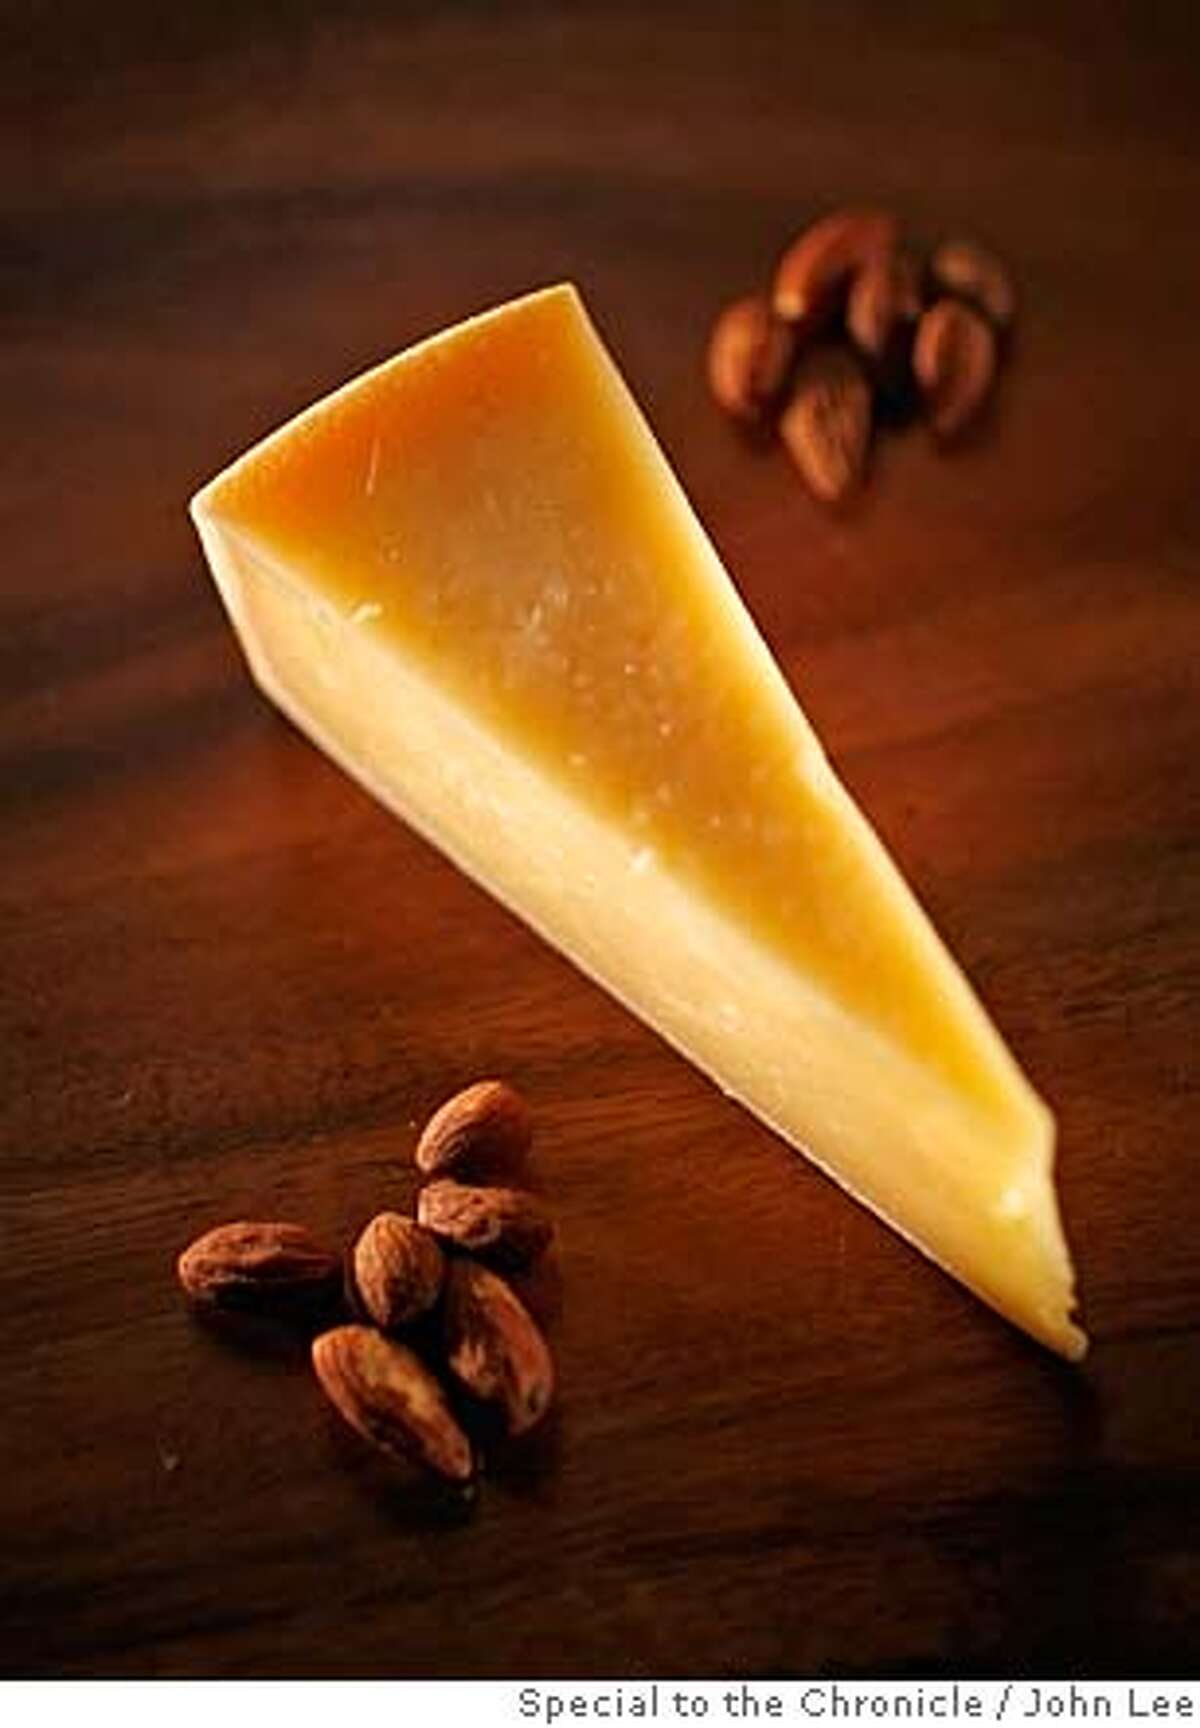 CHEESE15_JOHNLEE.JPG Hirtenkase (German cow's milk) cheese. By JOHN LEE/SPECIAL TO THE CHRONICLE